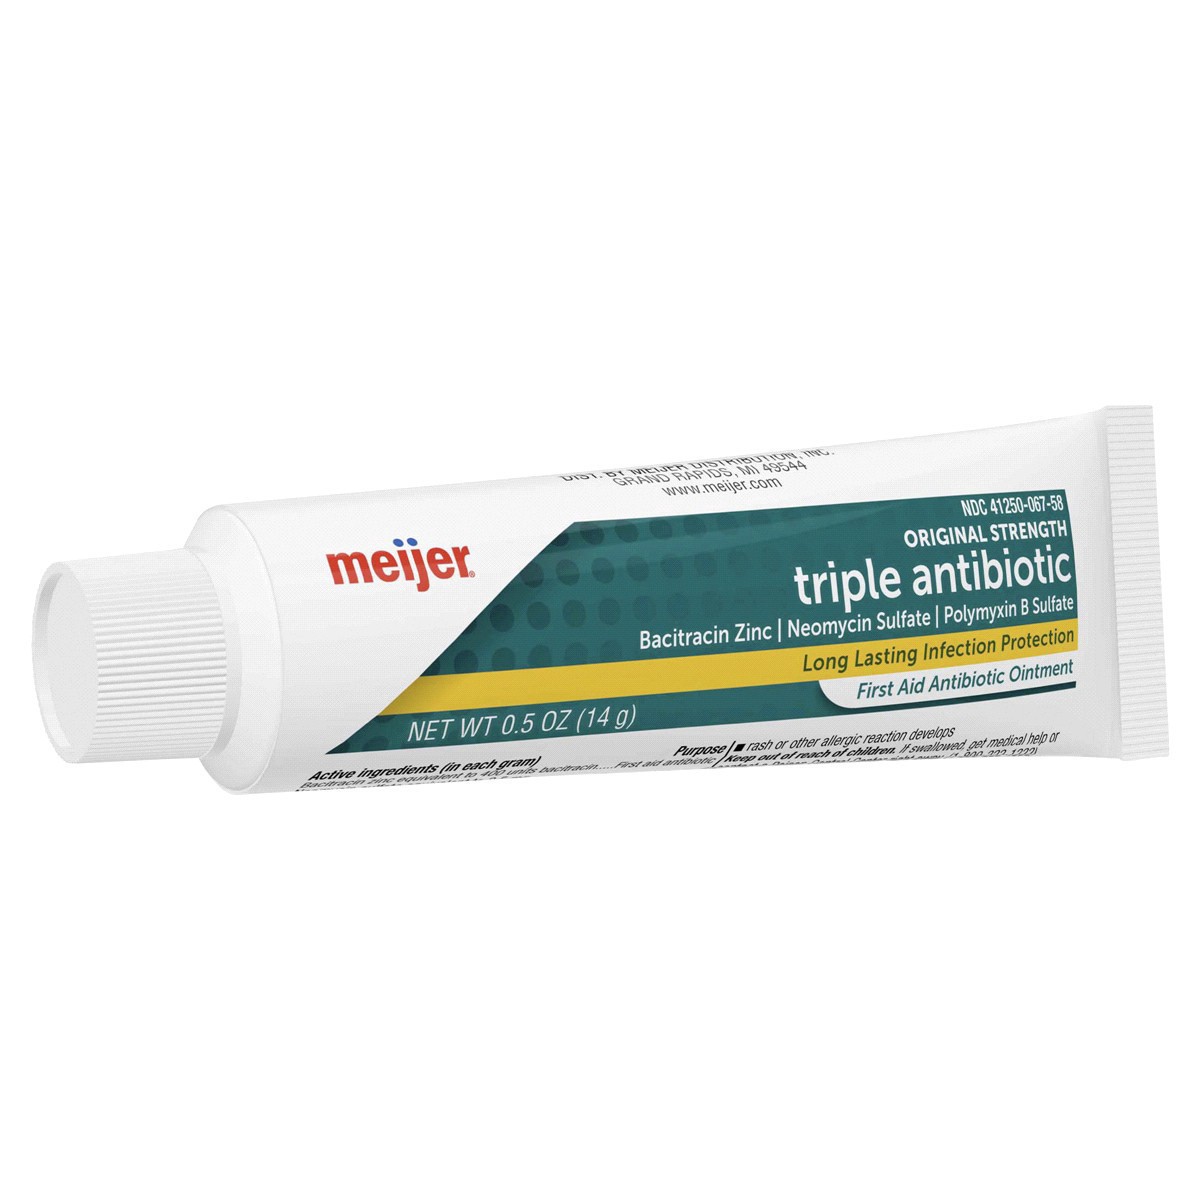 slide 5 of 25, Meijer First Aid Triple Antibiotic Ointment, Treats Minor Cuts, Scrapes and Burns, 0.5 oz